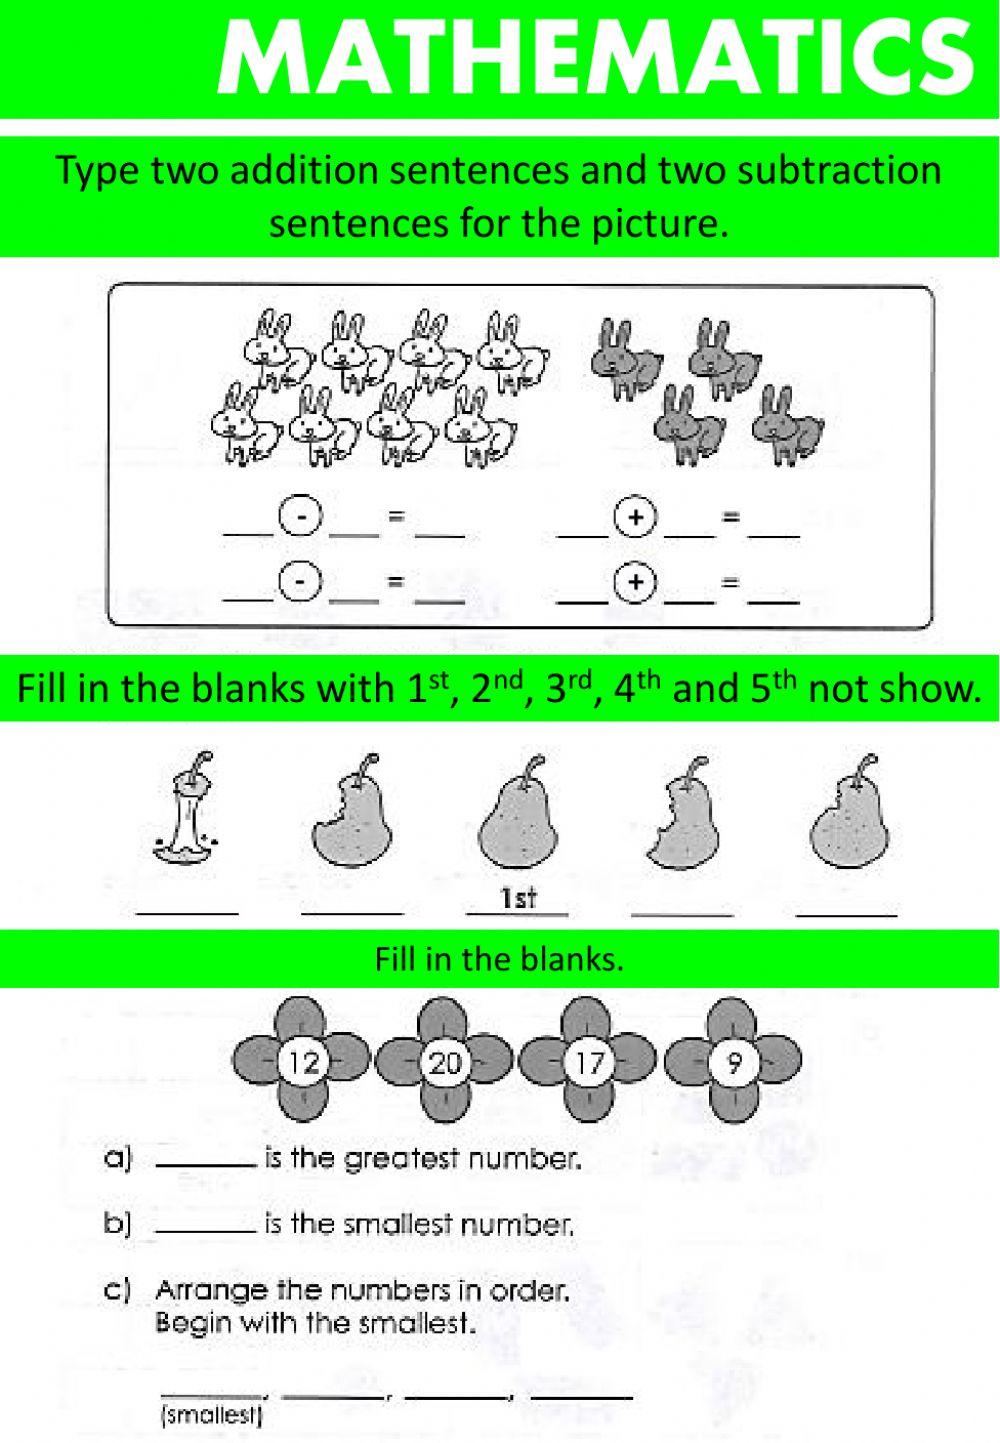 Week 24 Math - Fill in the missing numbers